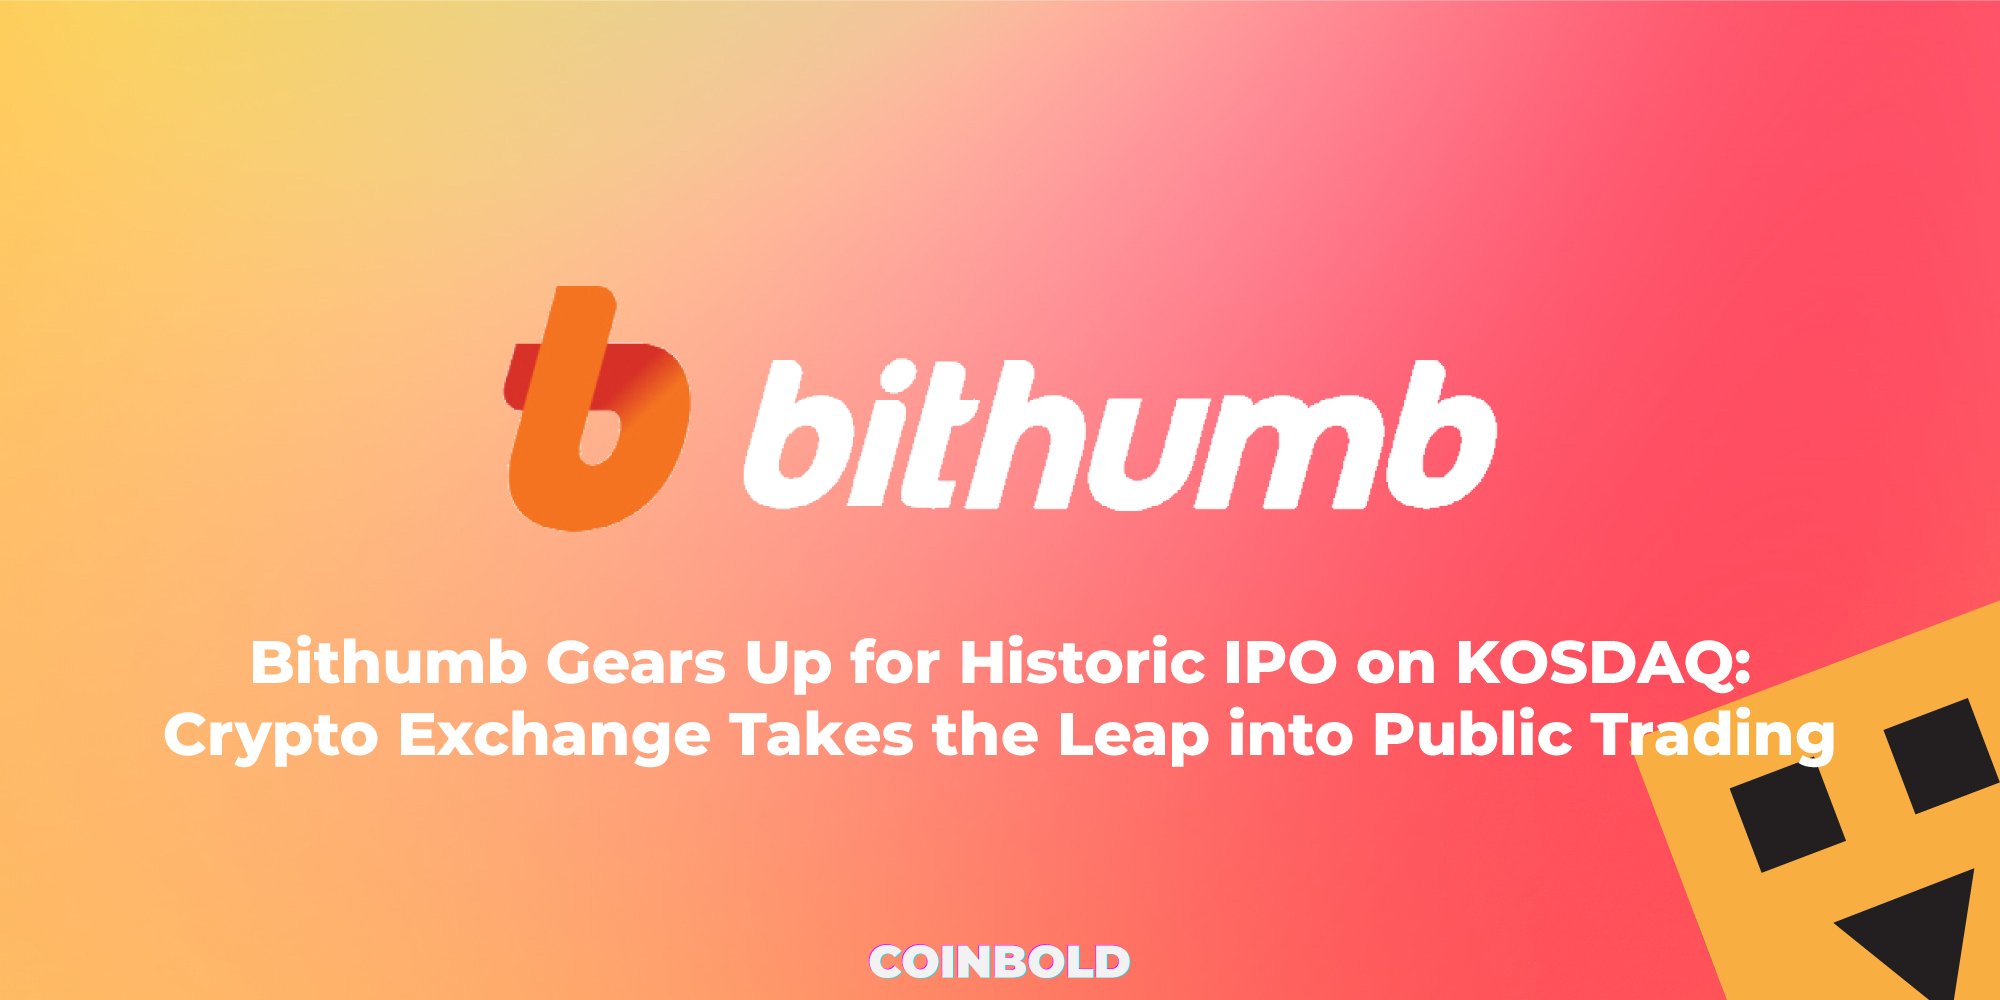 Bithumb Gears Up for Historic IPO on KOSDAQ: Crypto Exchange Takes the Leap into Public Trading